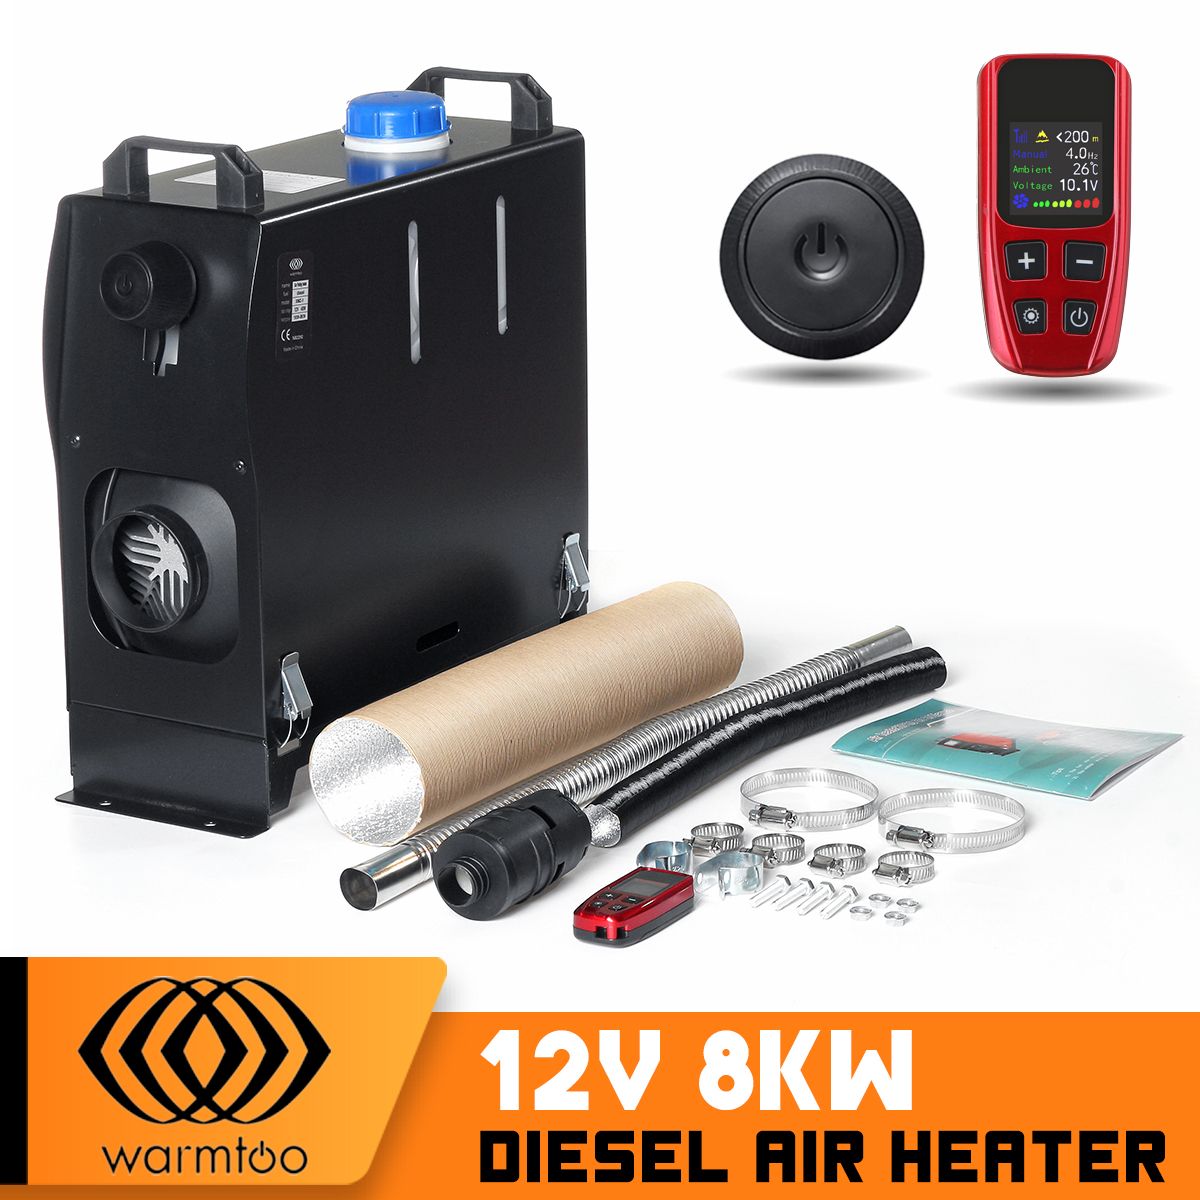 Warmtoo-12V-8KW-Car-Heater-Parking-Air-Heater-Electronic-Heater-Fan-Defroster-Defogger-Fast-Heating--1653968